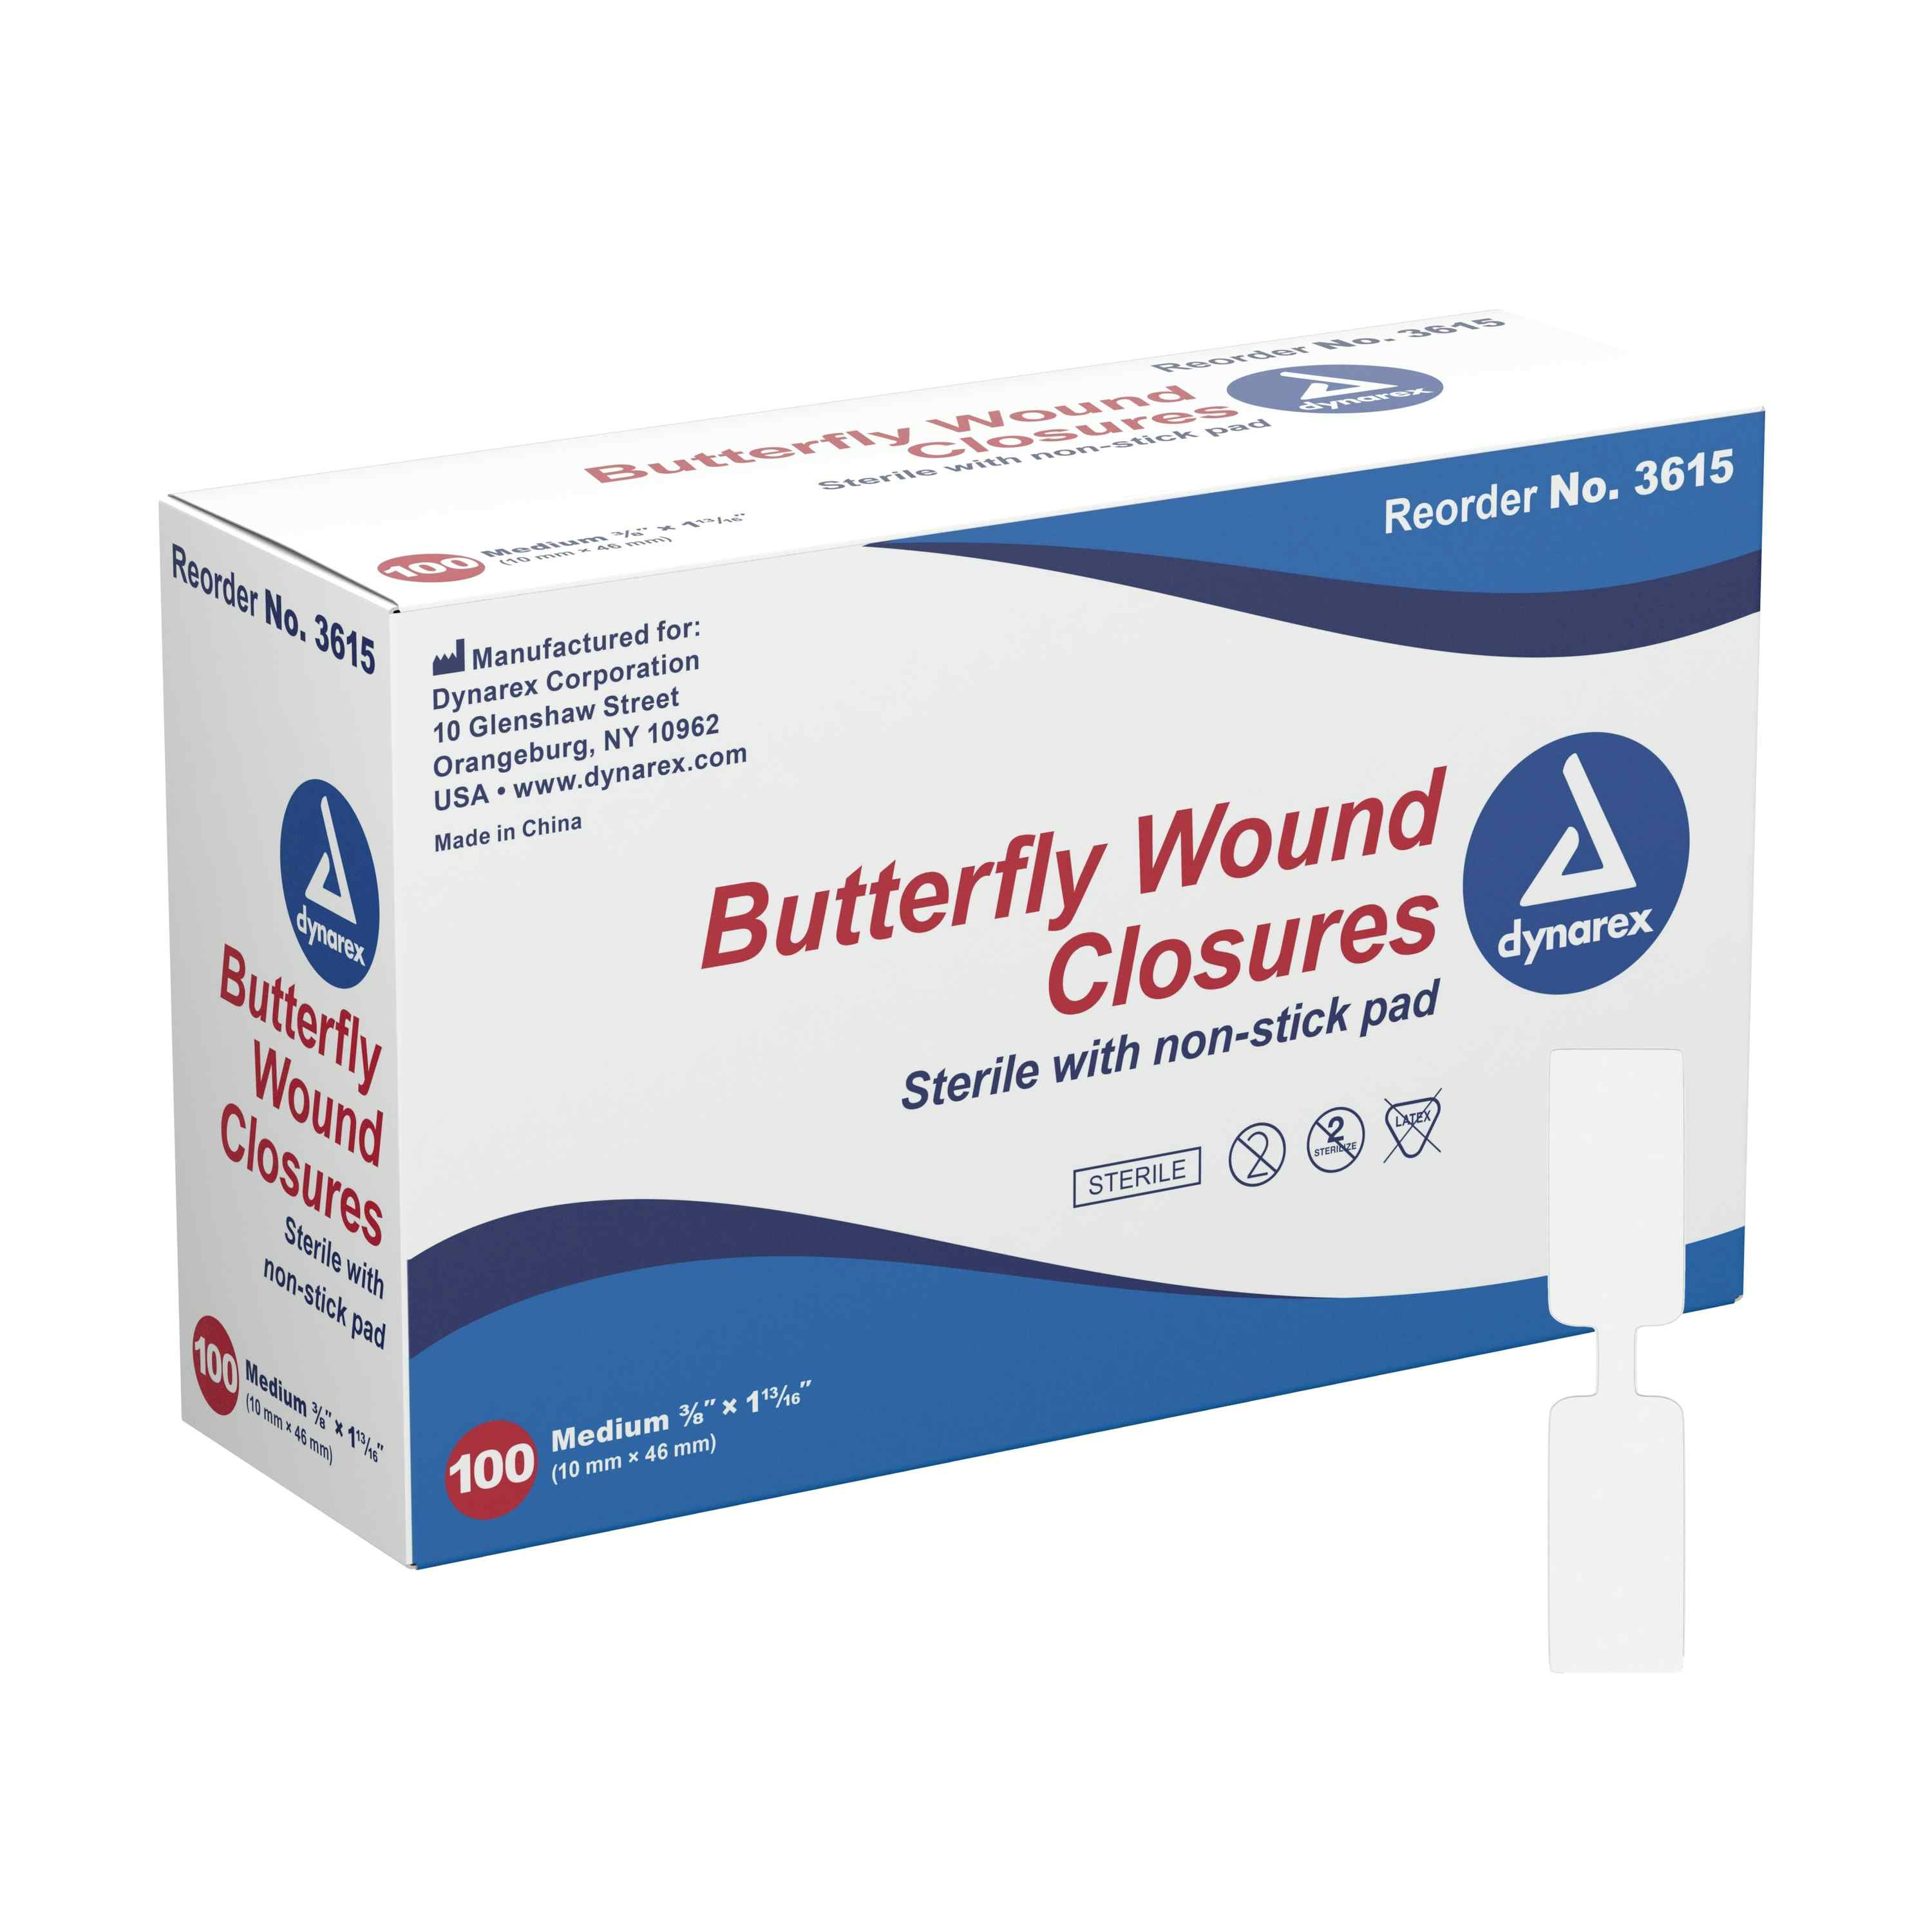 Dynarex Sterile with Non-Stick Pad Butterfly Wound Closures, 3/8 X 1-13/16"